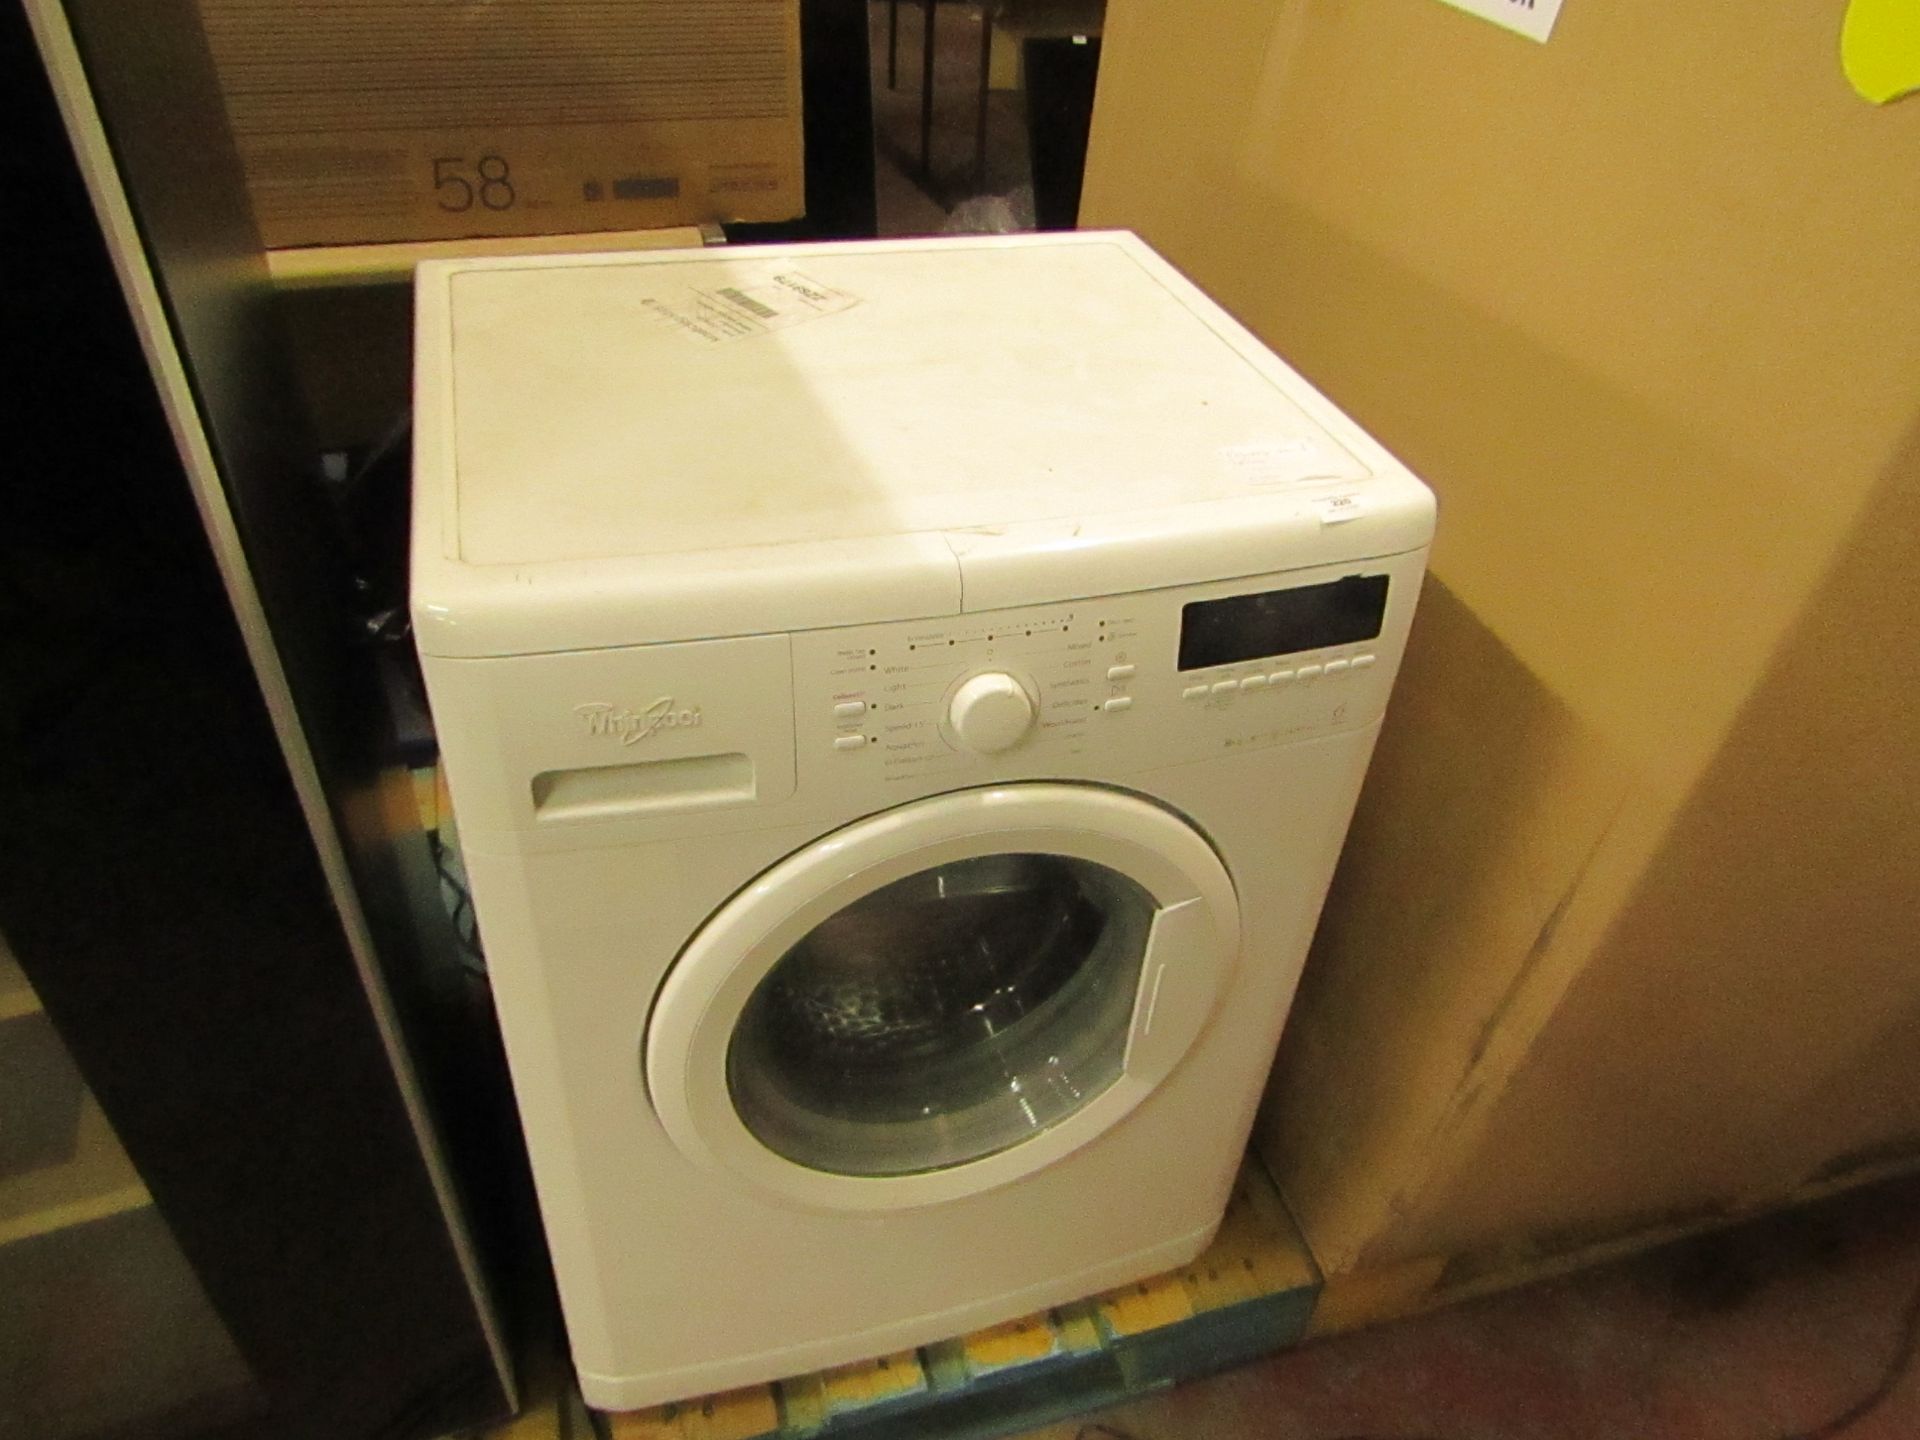 Whirlpool 8kg washer - 1400 rpm - Power On & Spins